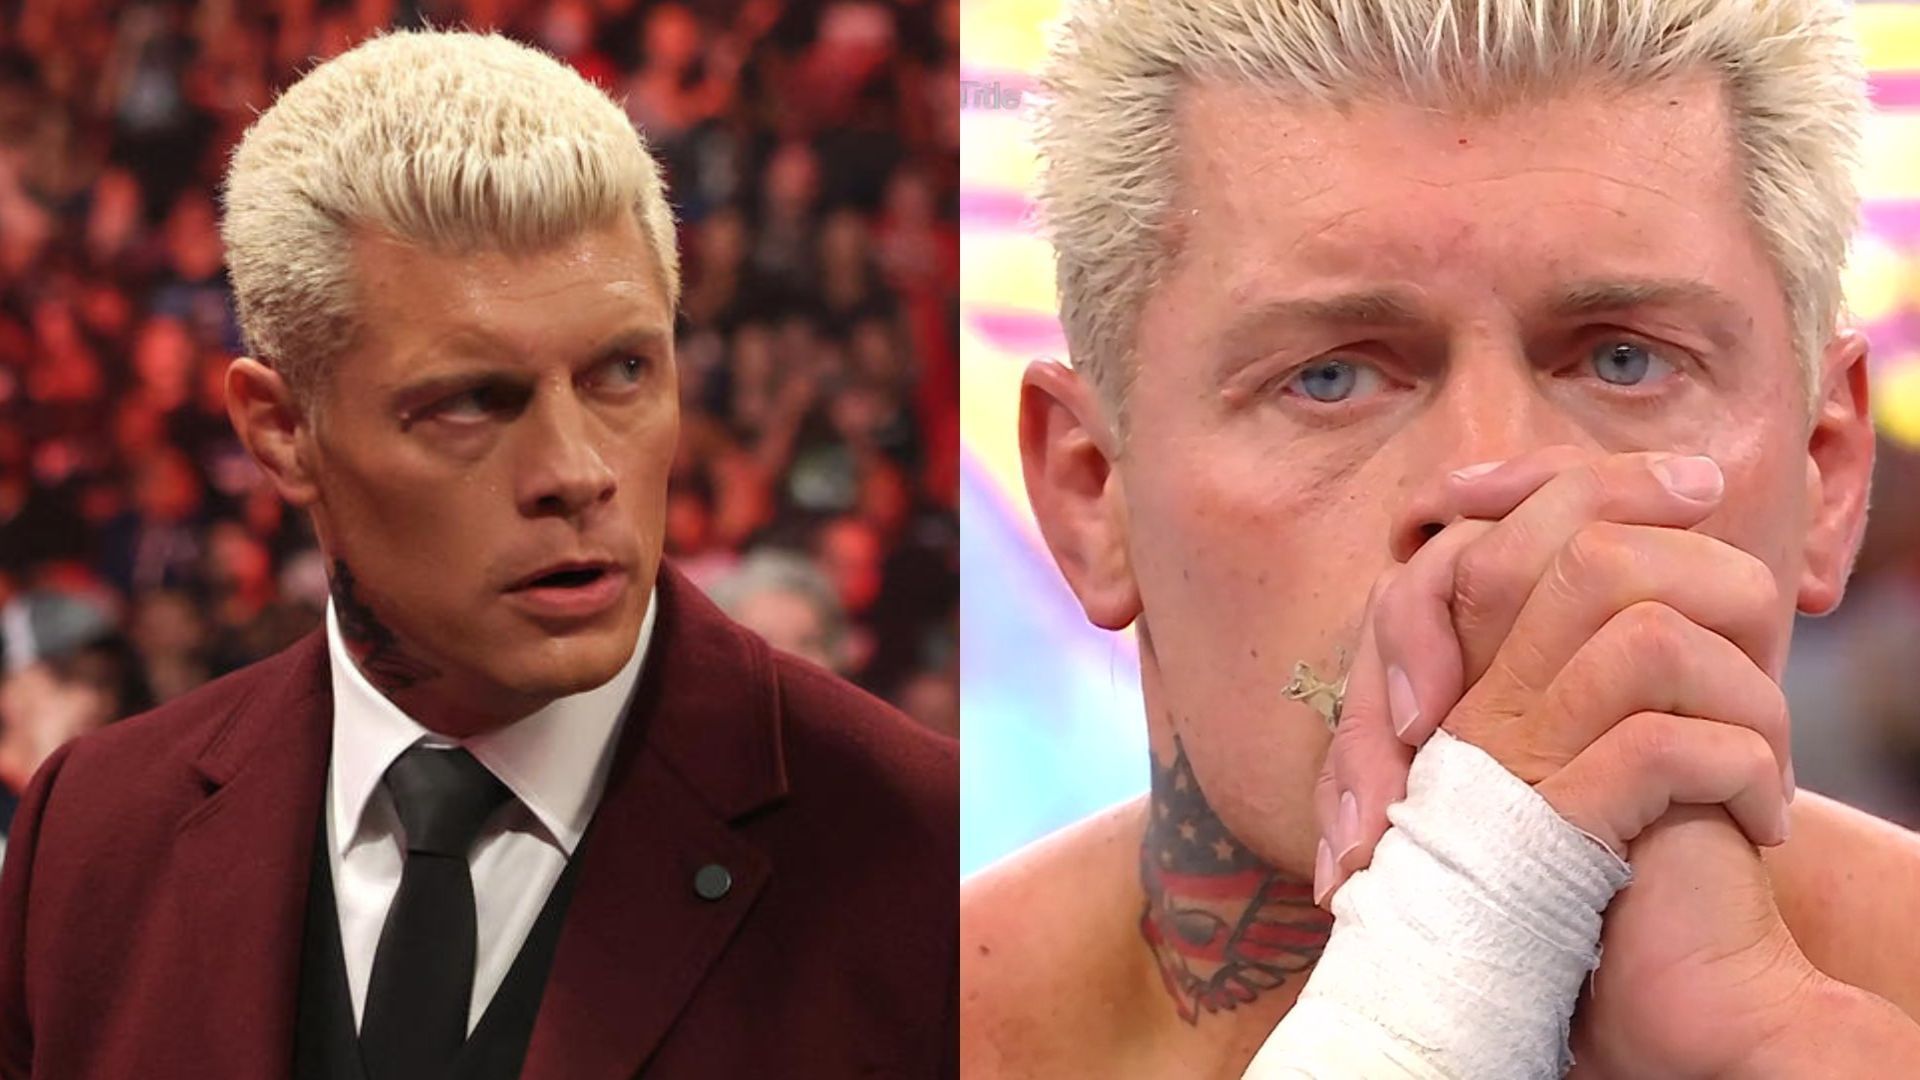 Cody Rhodes lost to Roman Reigns last night at WrestleMania. 